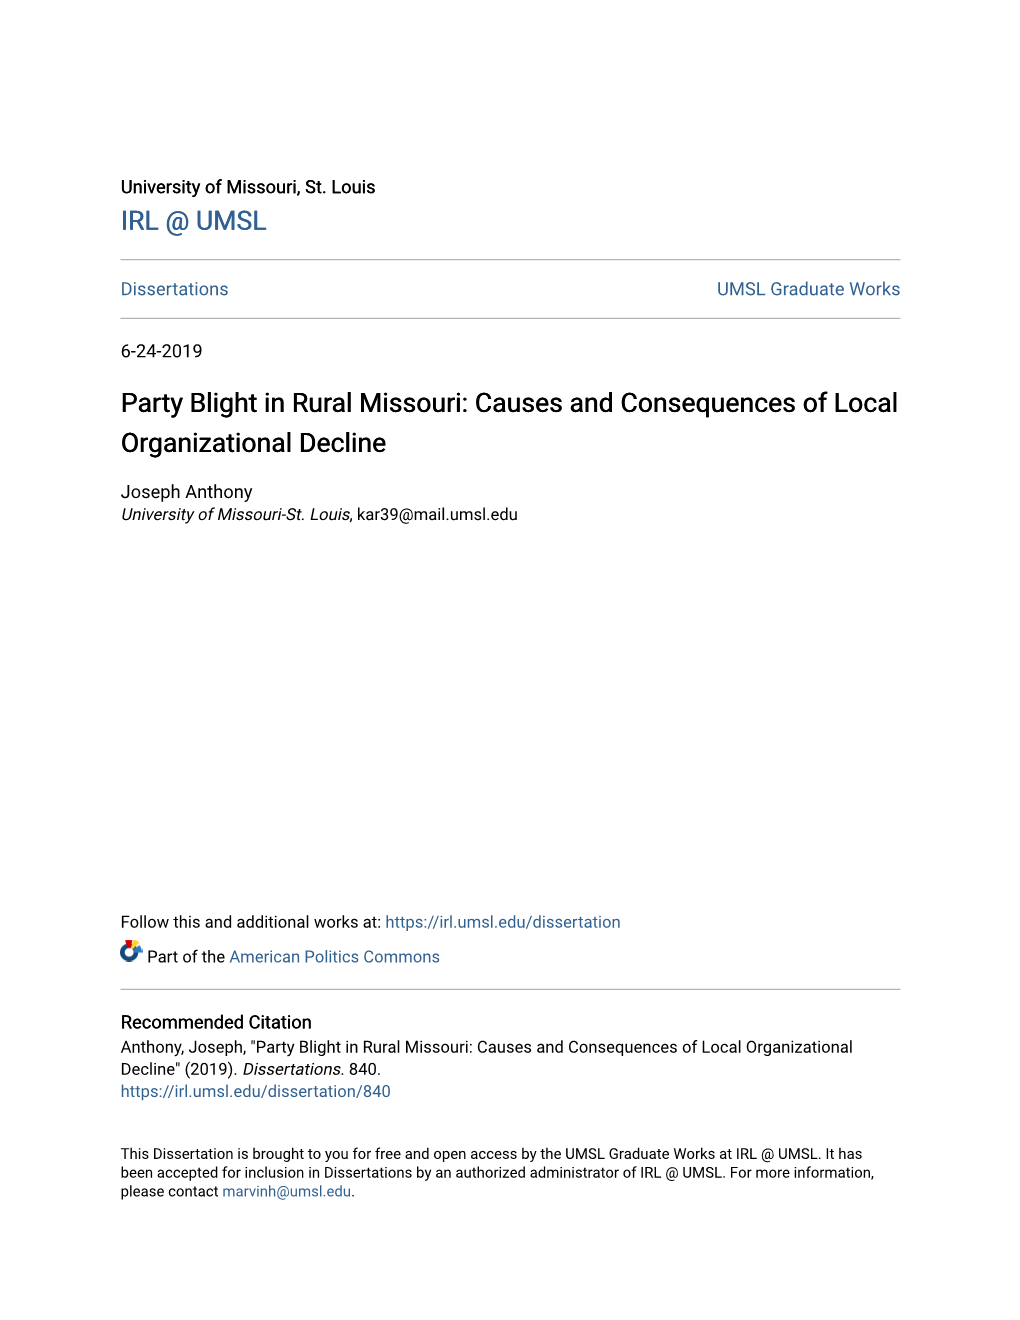 Party Blight in Rural Missouri: Causes and Consequences of Local Organizational Decline